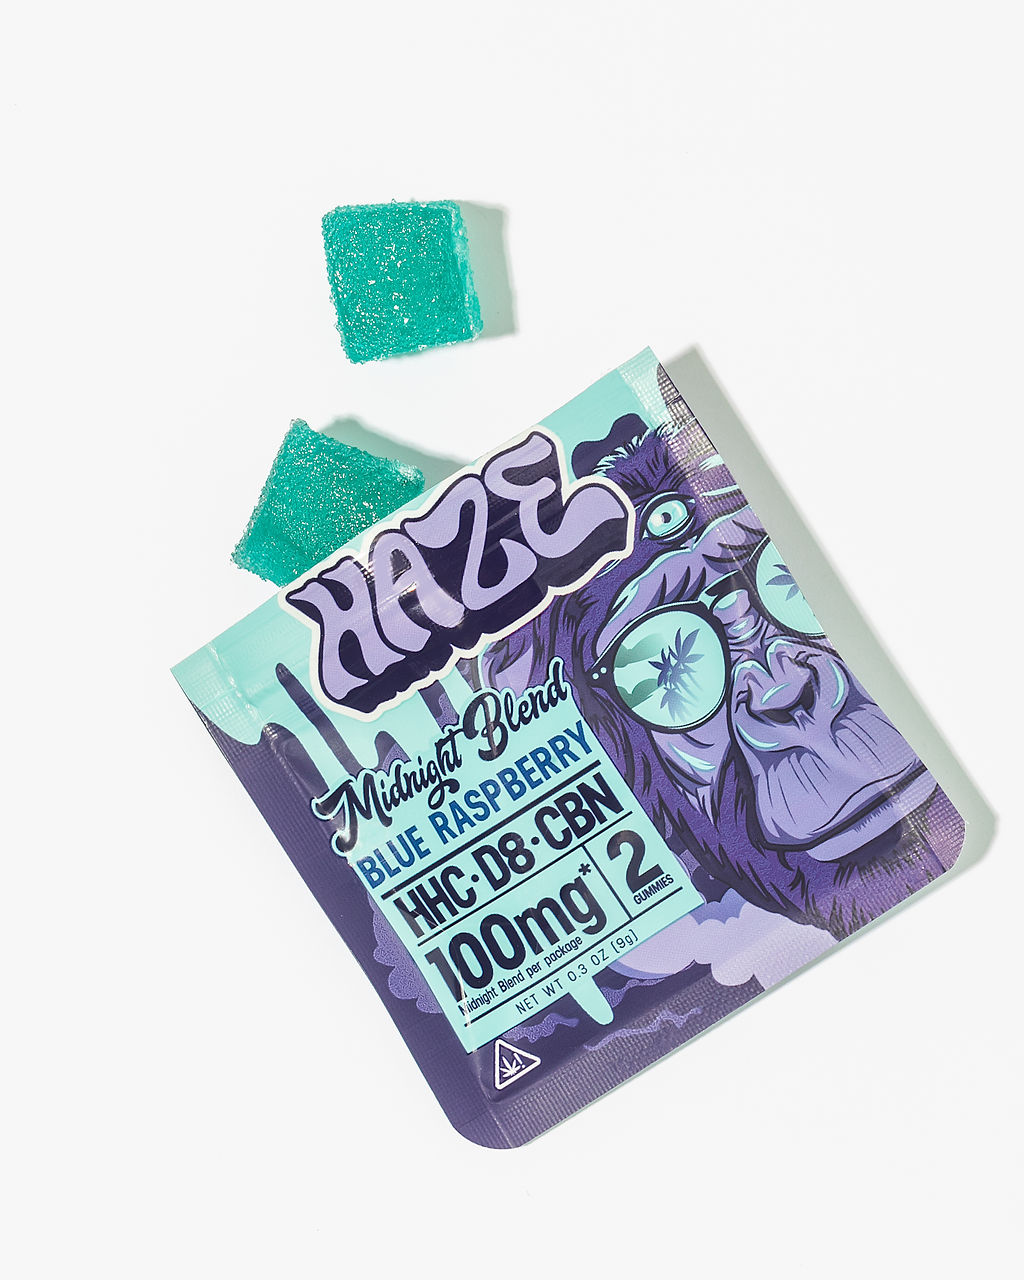 Haze THC Haven: Embark on an Epic Adventure with Just Delta’s Sensational Selection!